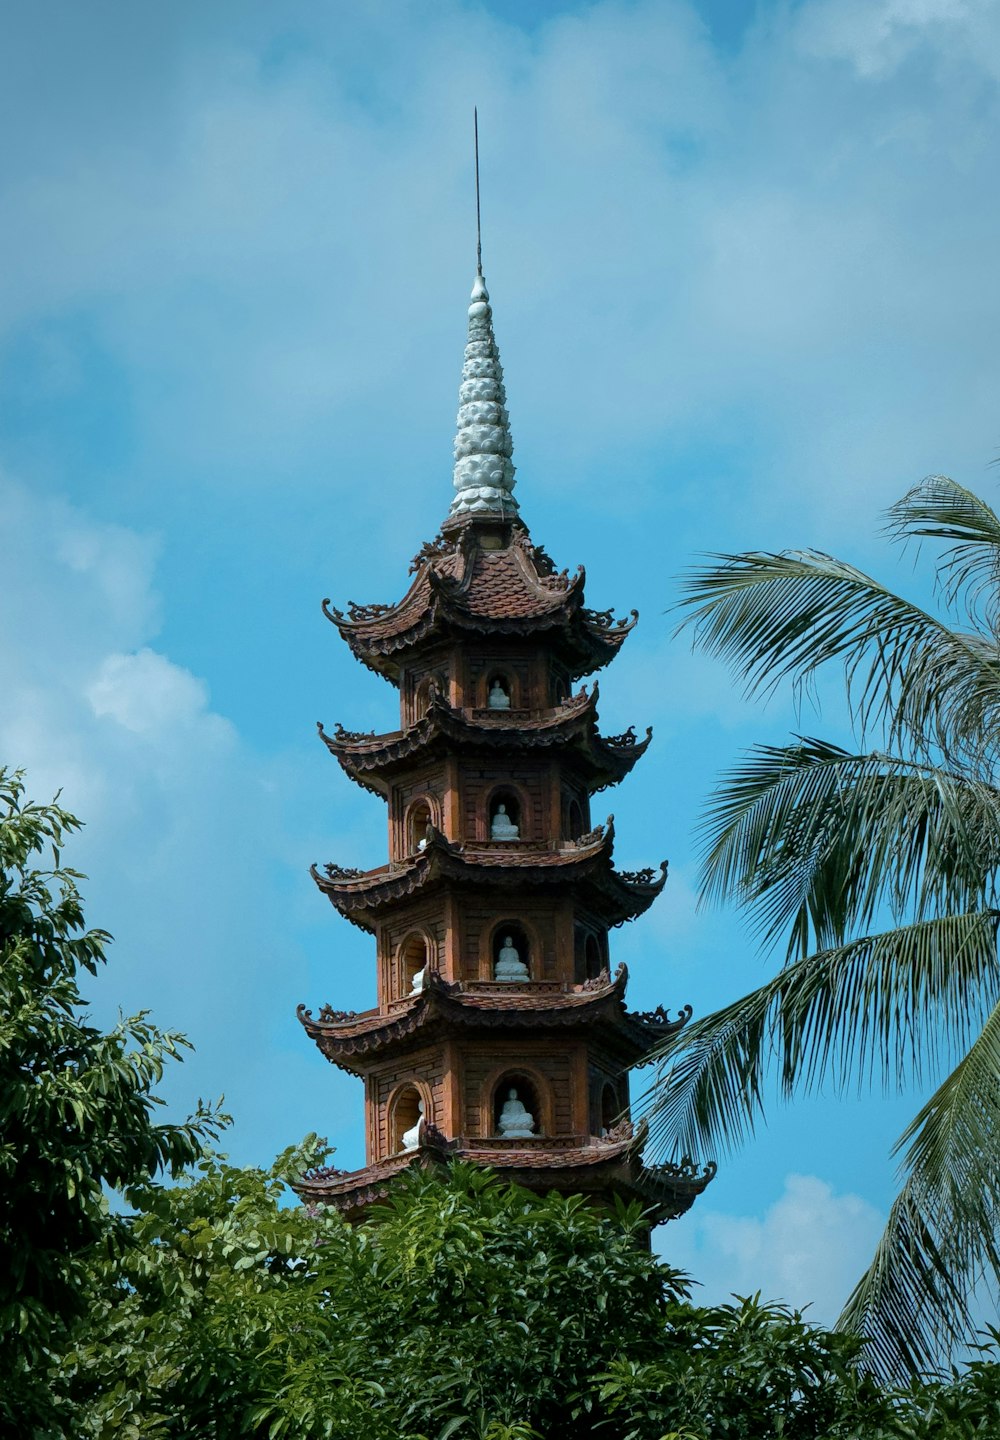 a tall tower with a white roof surrounded by trees